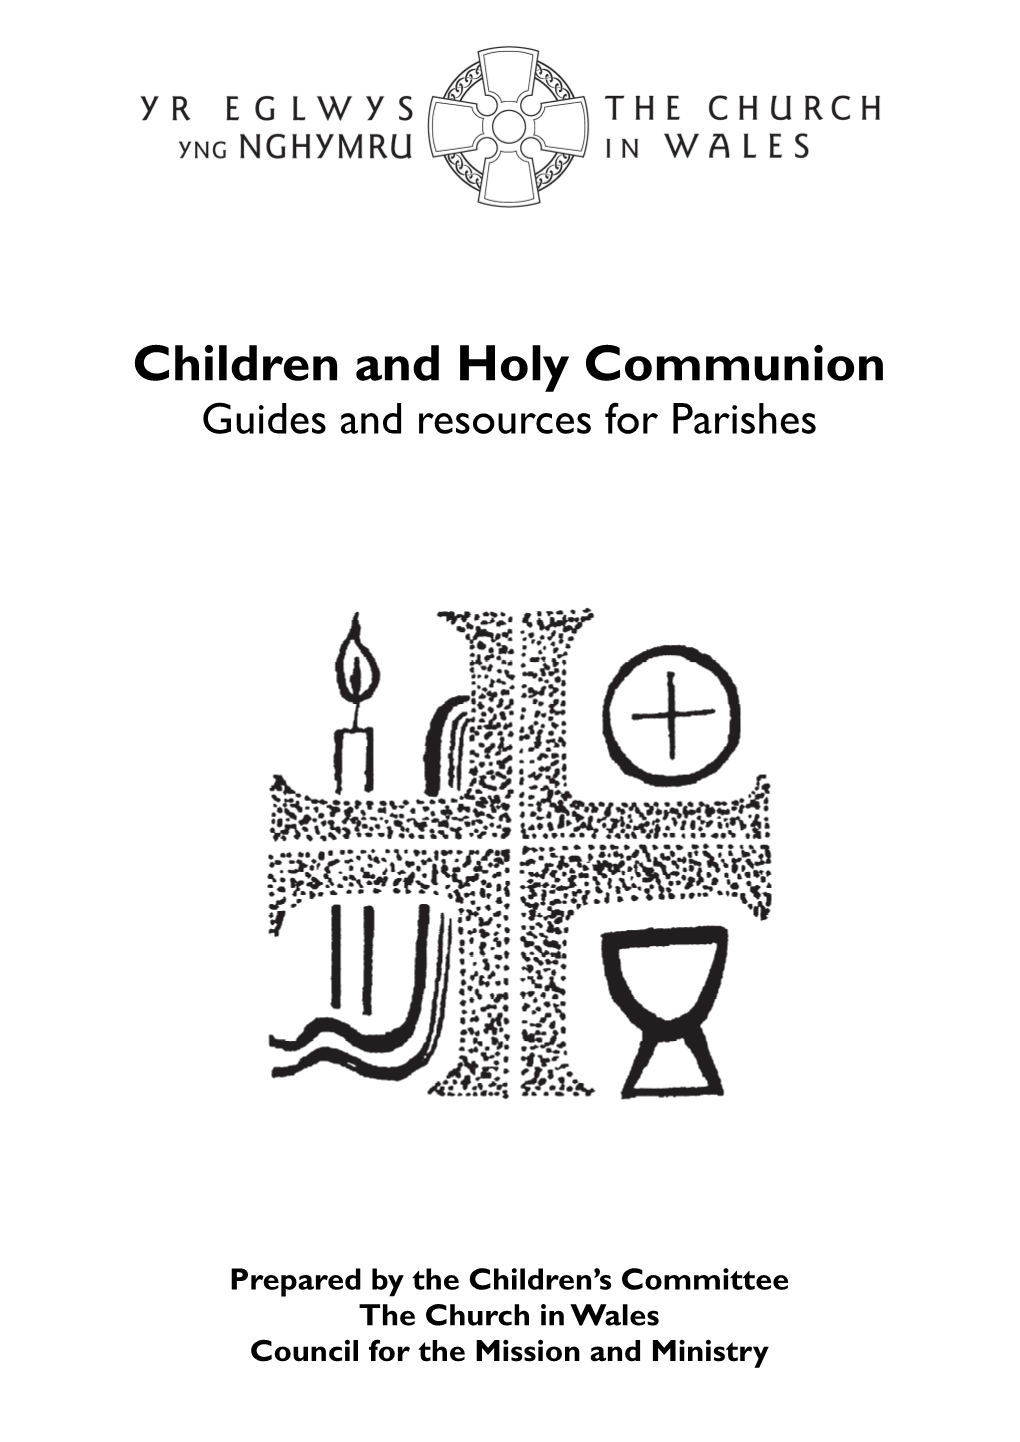 Children and Holy Communion Guides and Resources for Parishes